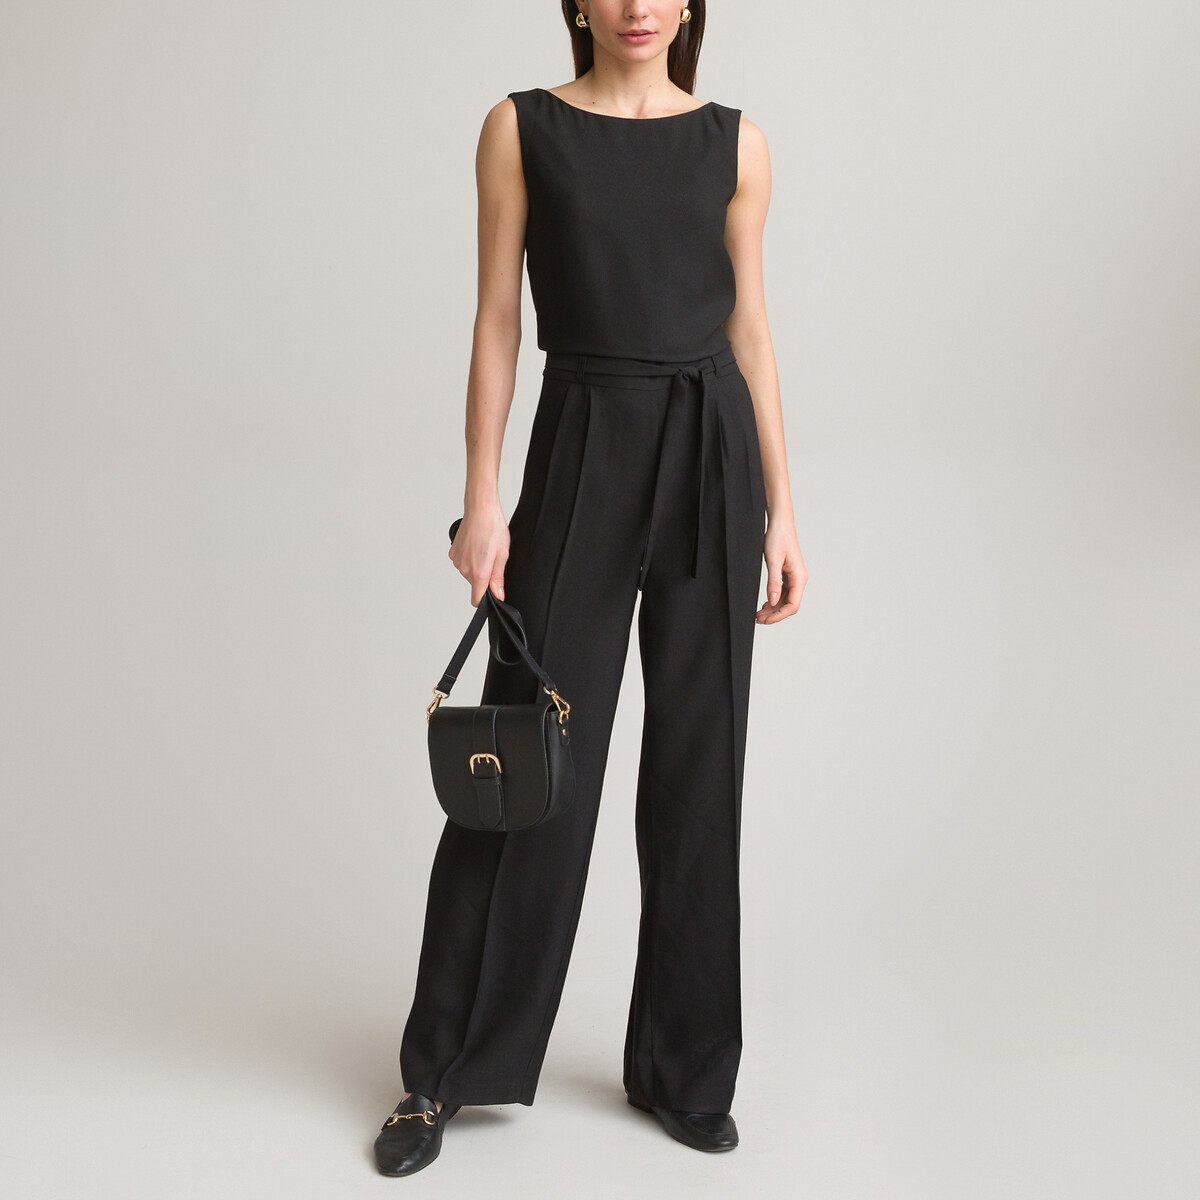 Recycled Crepe Jumpsuit, Length 30.5"